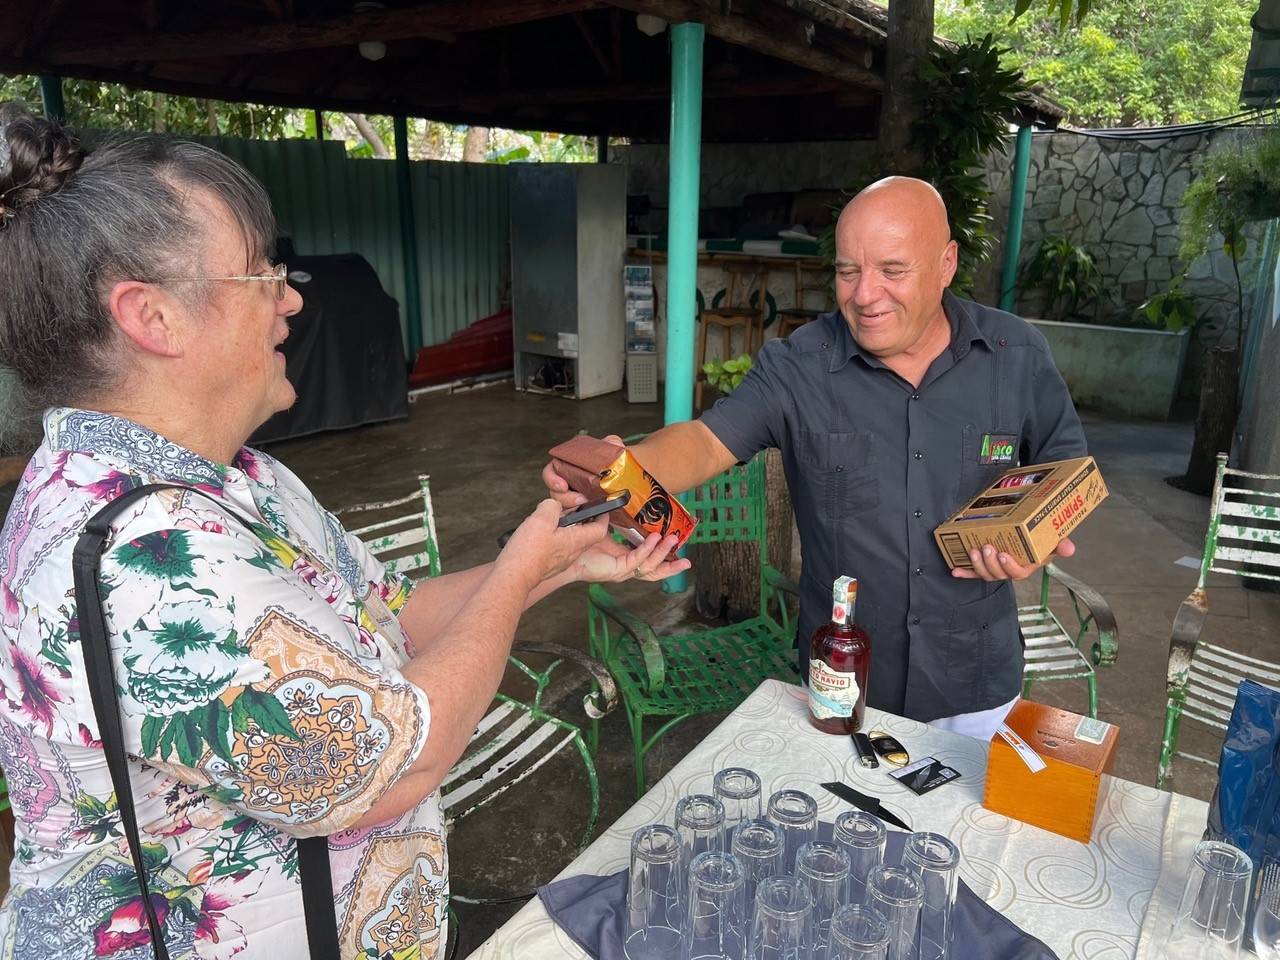 Photographs show Susan Savage of the Mendocino Coast Community Healthcare District delivering End the Embargo Coffee to one of her friends in Cuba in late January 2023 